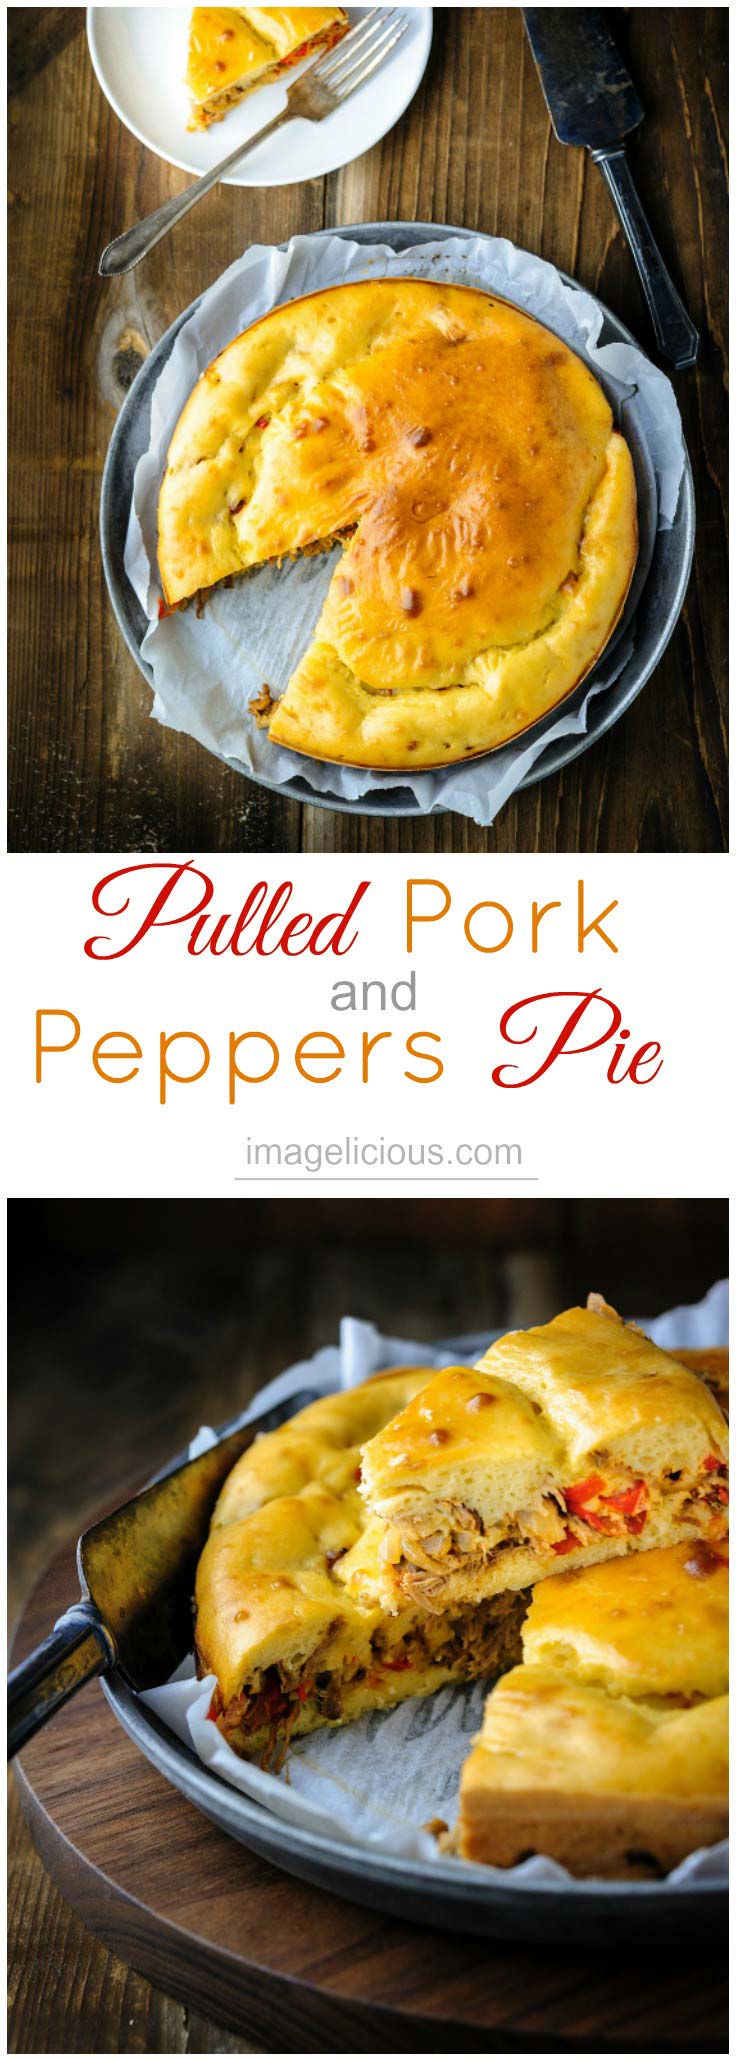 Pulled Pork and Peppers Pie is a great way to use up left over pulled pork. It's delicious warm with a side of salad or cold as a quick snack | Imagelicious